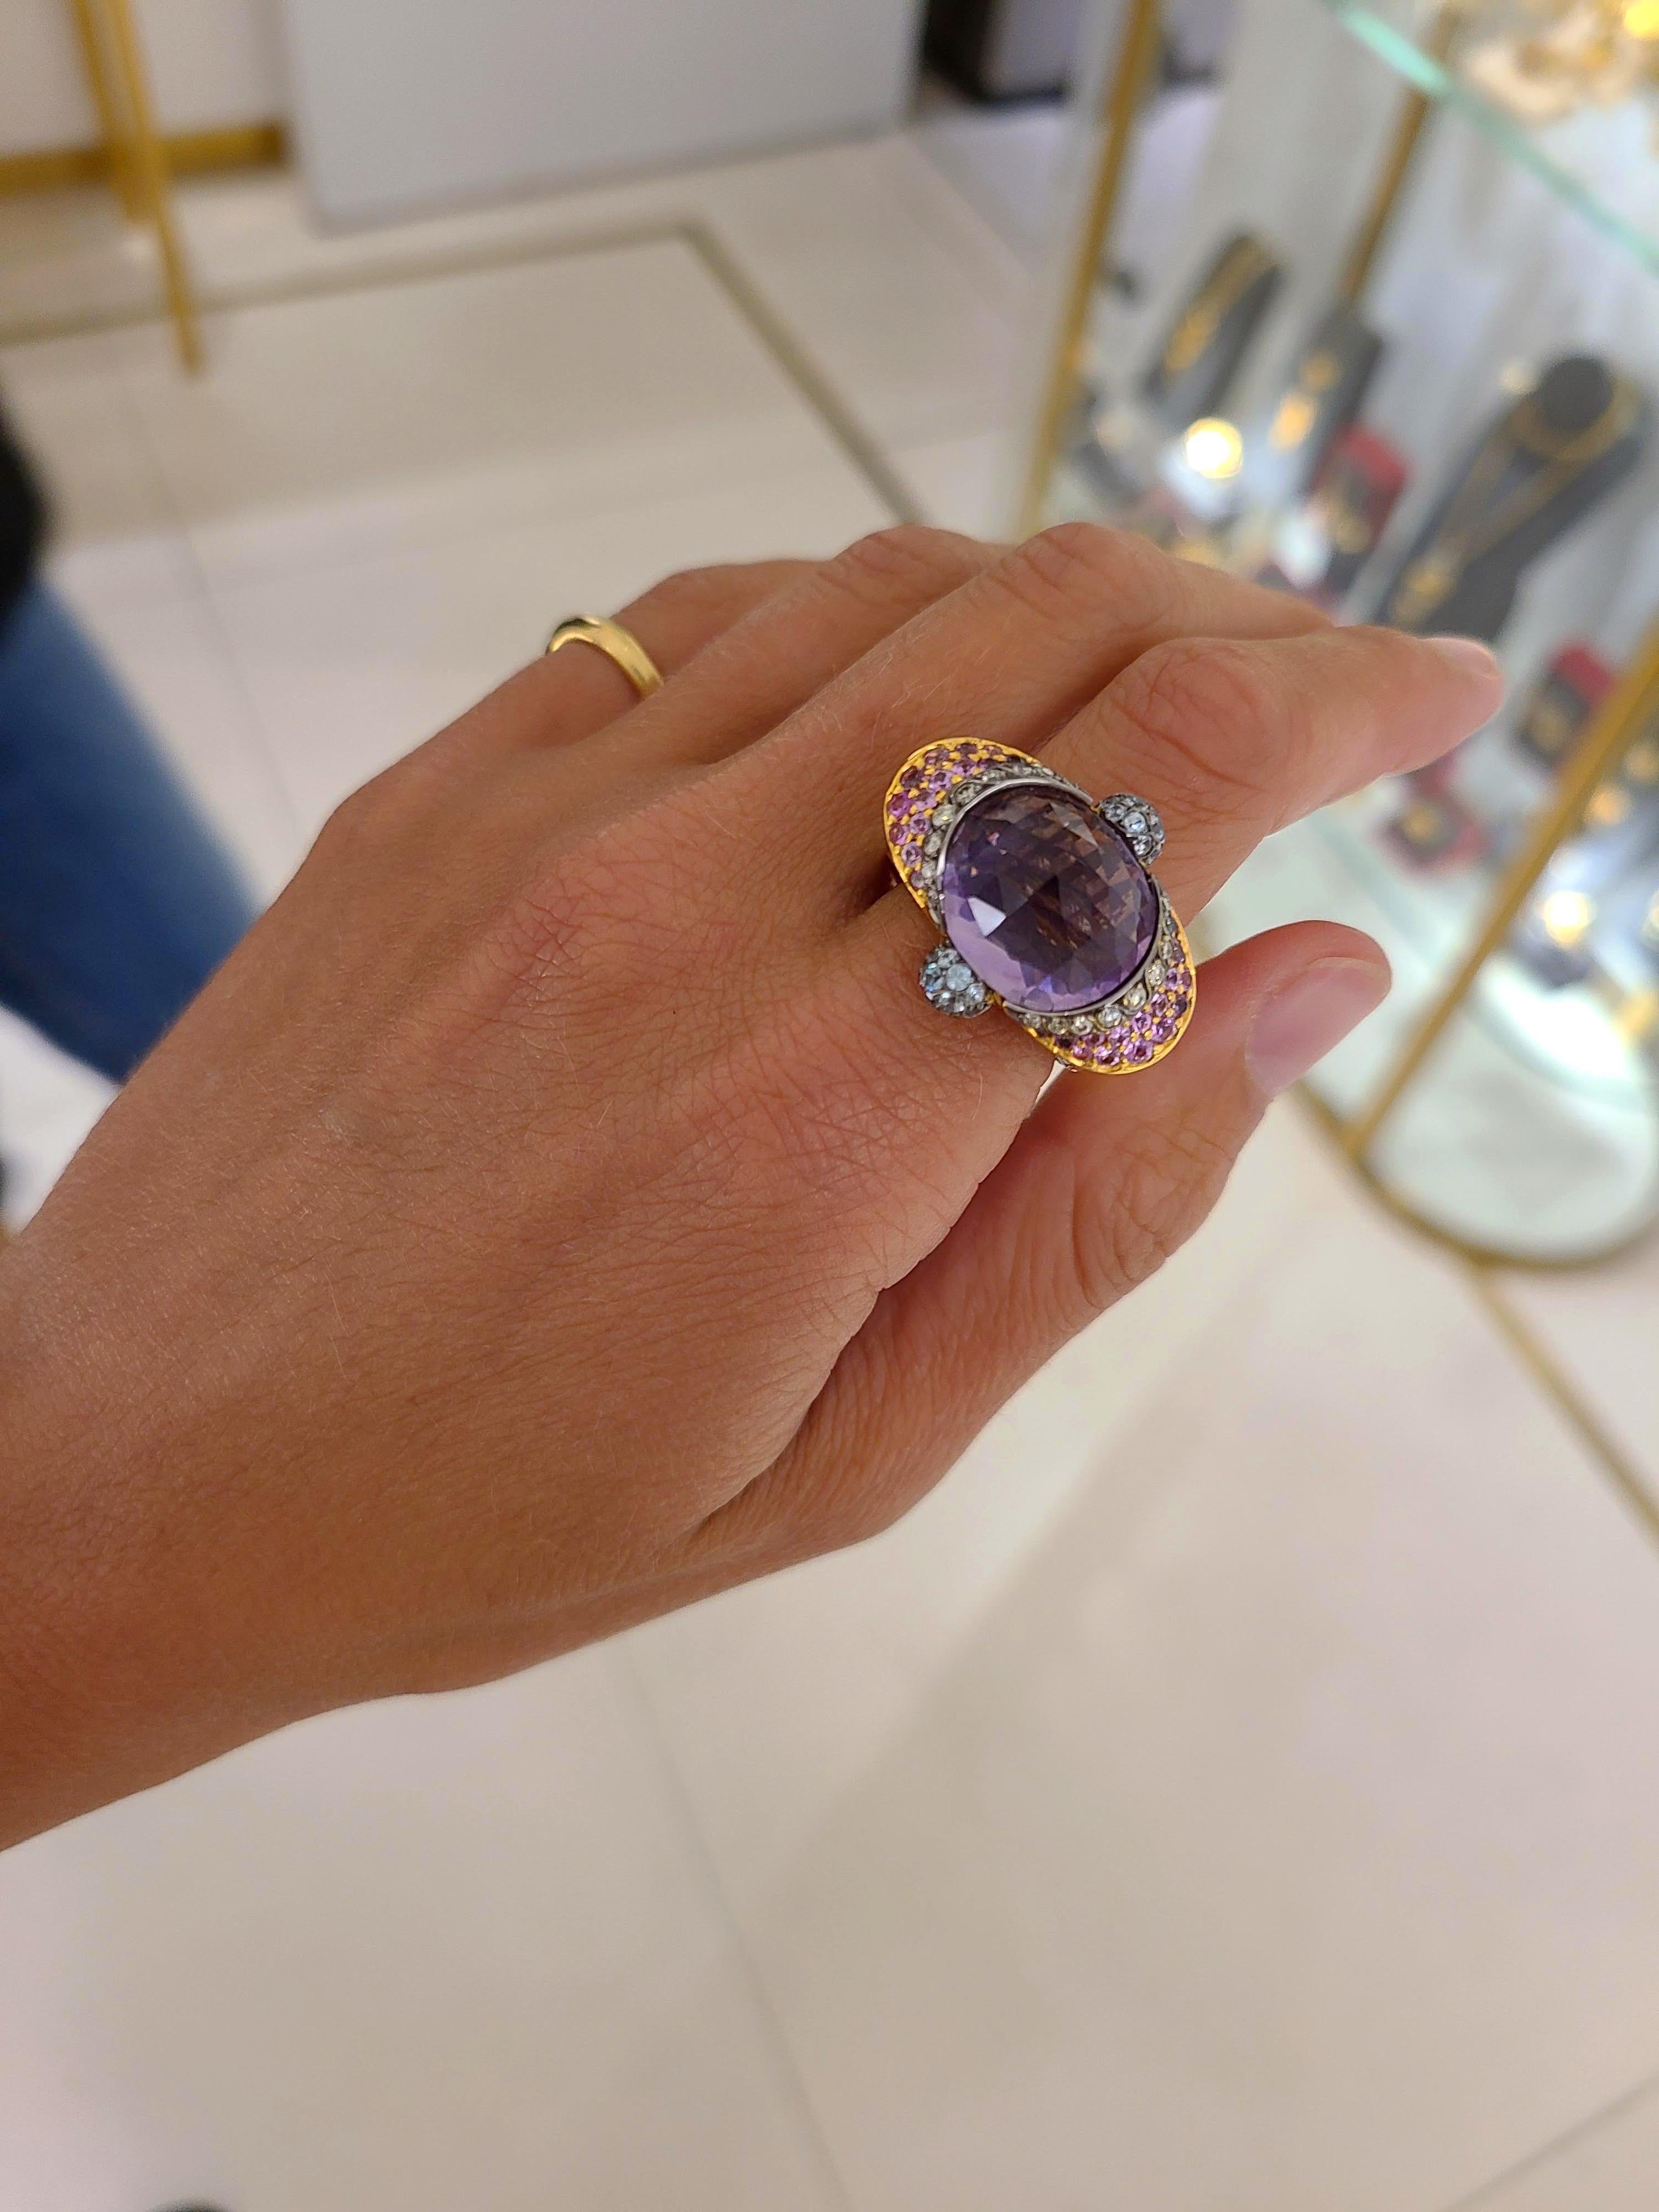 Zorab 18 Karat Gold, 12.86 Carat Amethyst, Diamonds and Pastel Sapphire Ring In New Condition For Sale In New York, NY